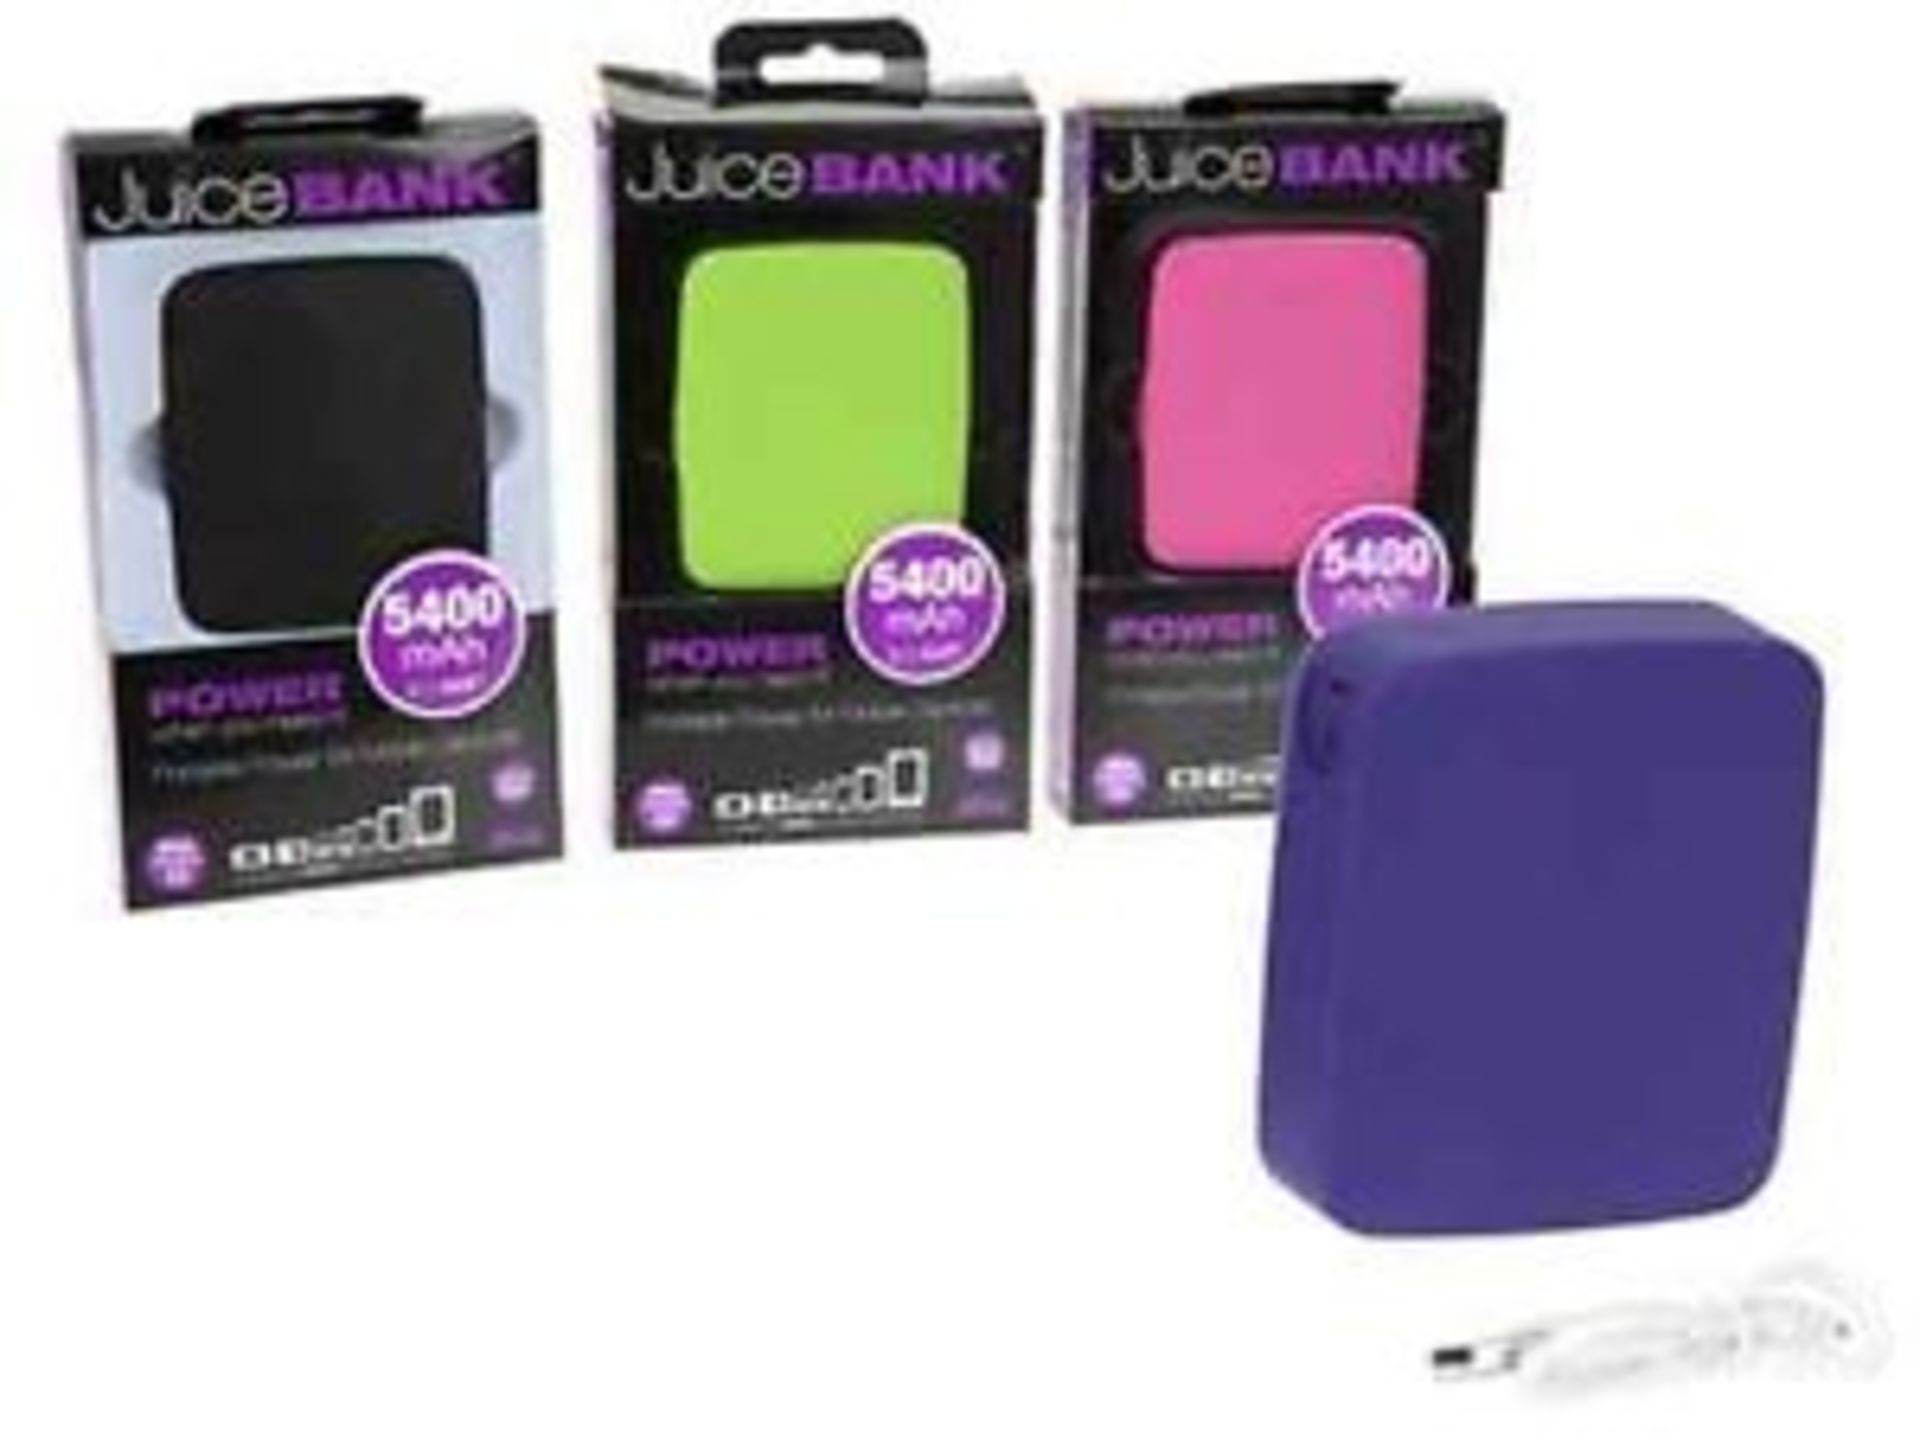 V Juice Bank phone charger 2.1 amp 5400mAh (total) suitable for mobiles, iPad and tablets with USB